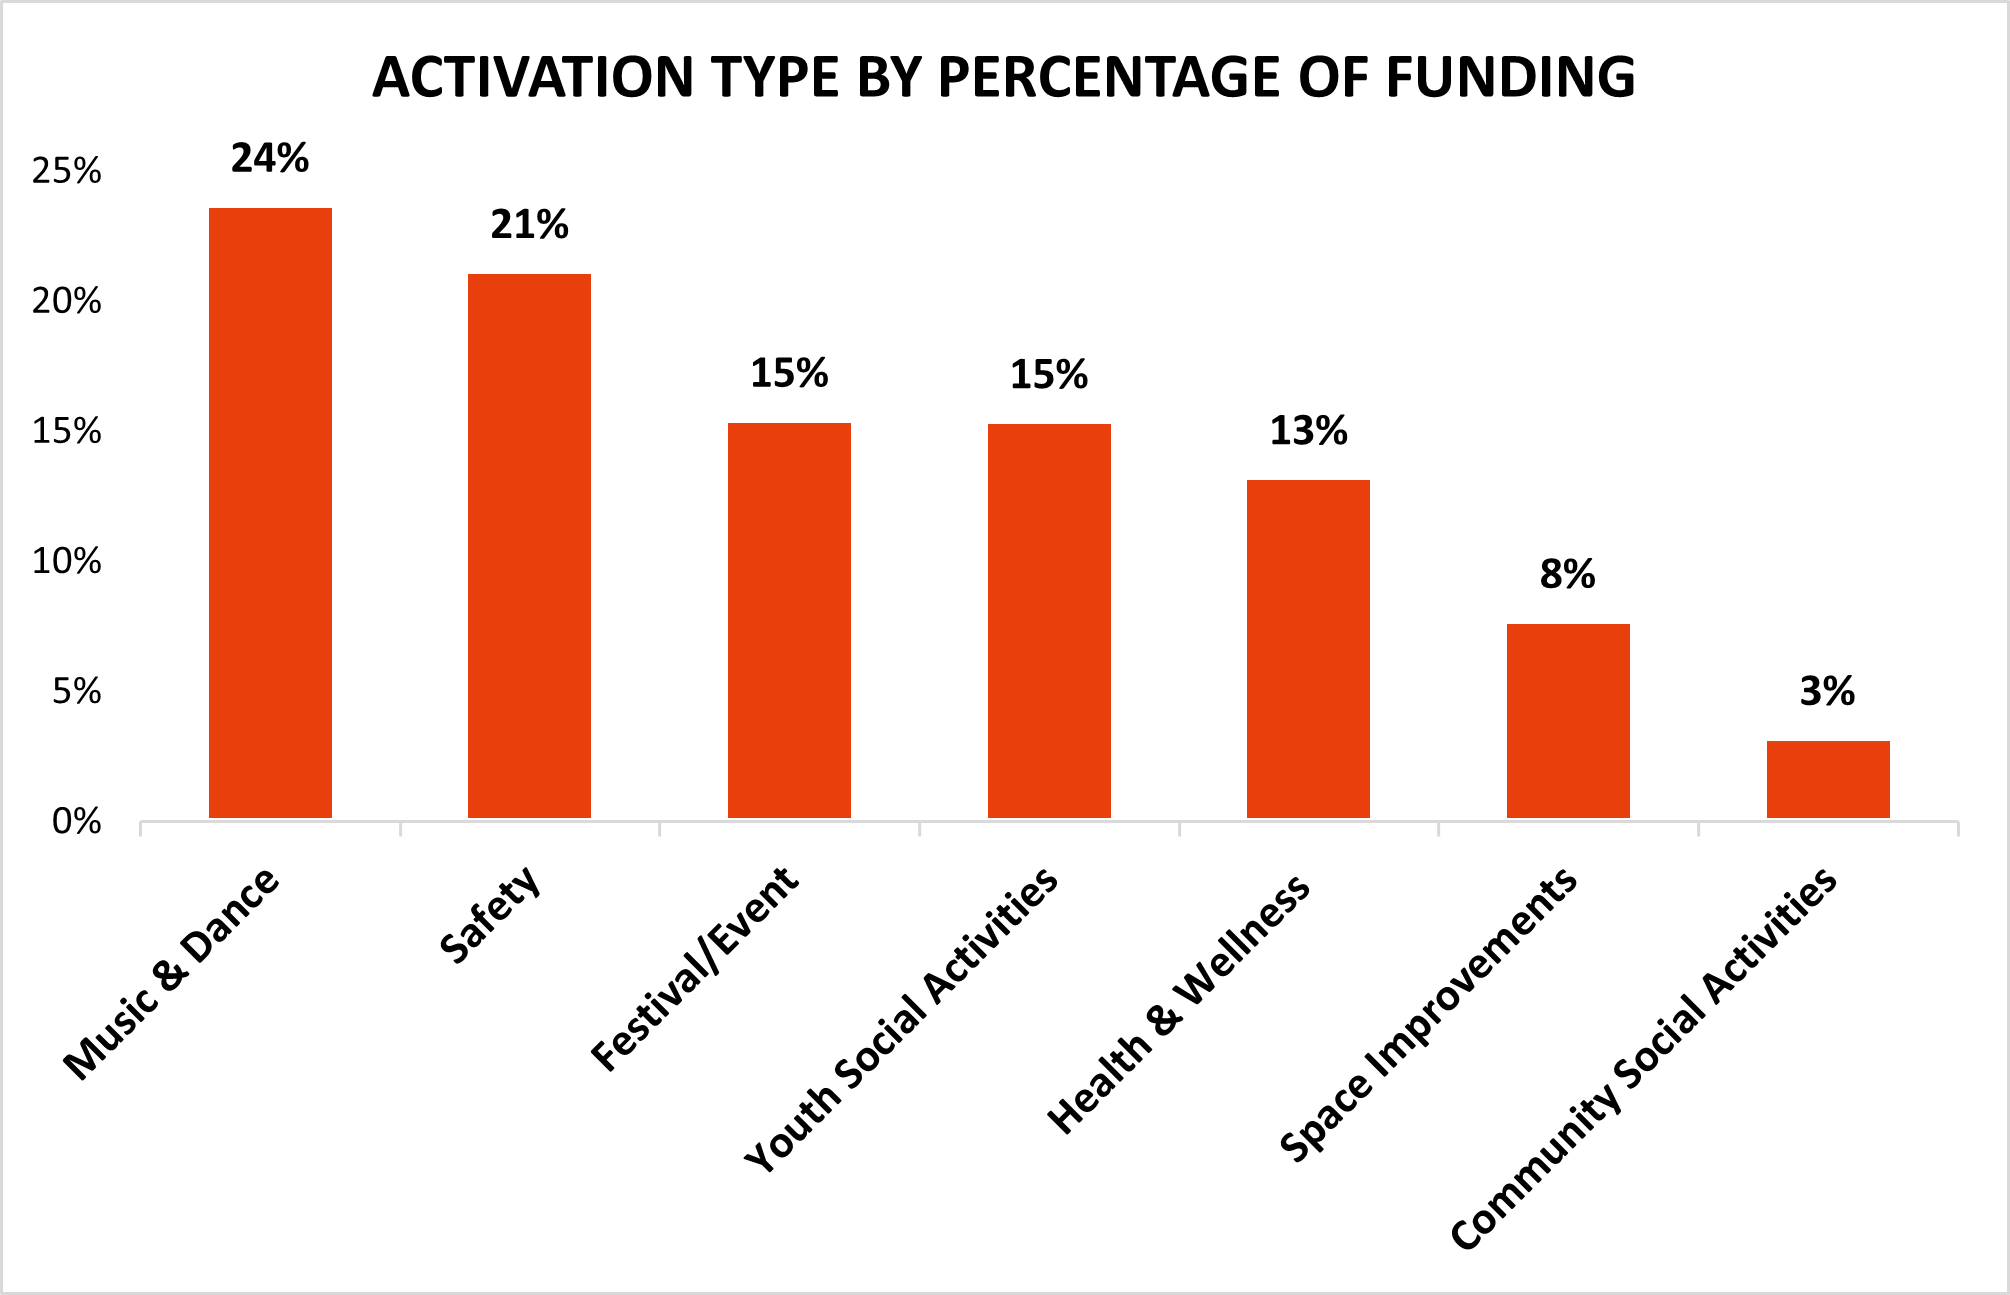 Bar chart showing types of parks activations by percentage of funding. Music & dance and safety activations represent the largest percentages at 24% and 21% respectively. Festivals/Events were 15%, Youth Social Activities were 15%, Health & Wellness Activities were 13%, Space Improvements were 8%, and Community Social Activities were 3%. 